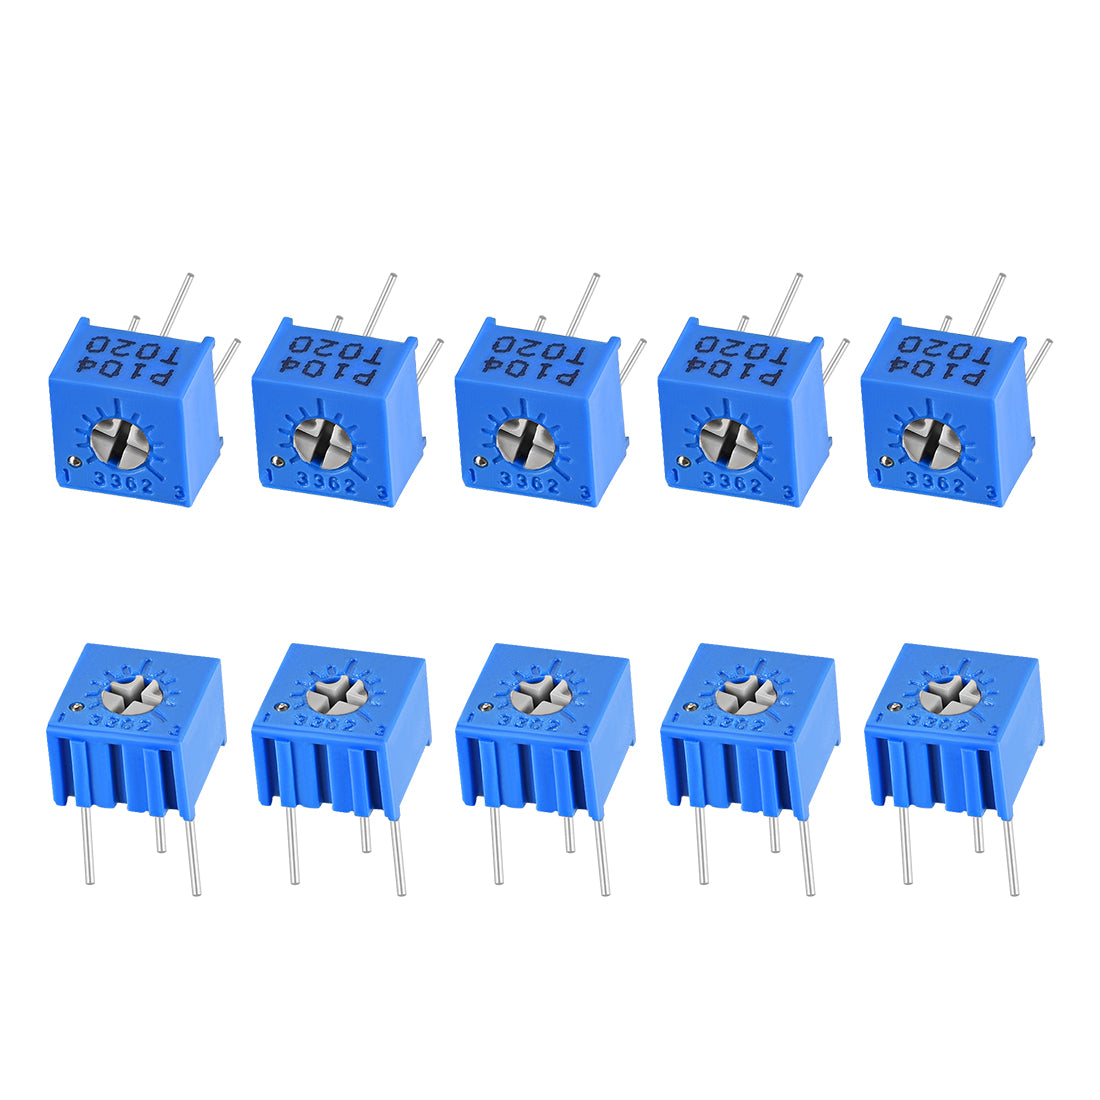 uxcell Uxcell 3362 Trimmer Potentiometer 100K Ohm Top Adjustment Horizontal Variable Resistors 10Pcs